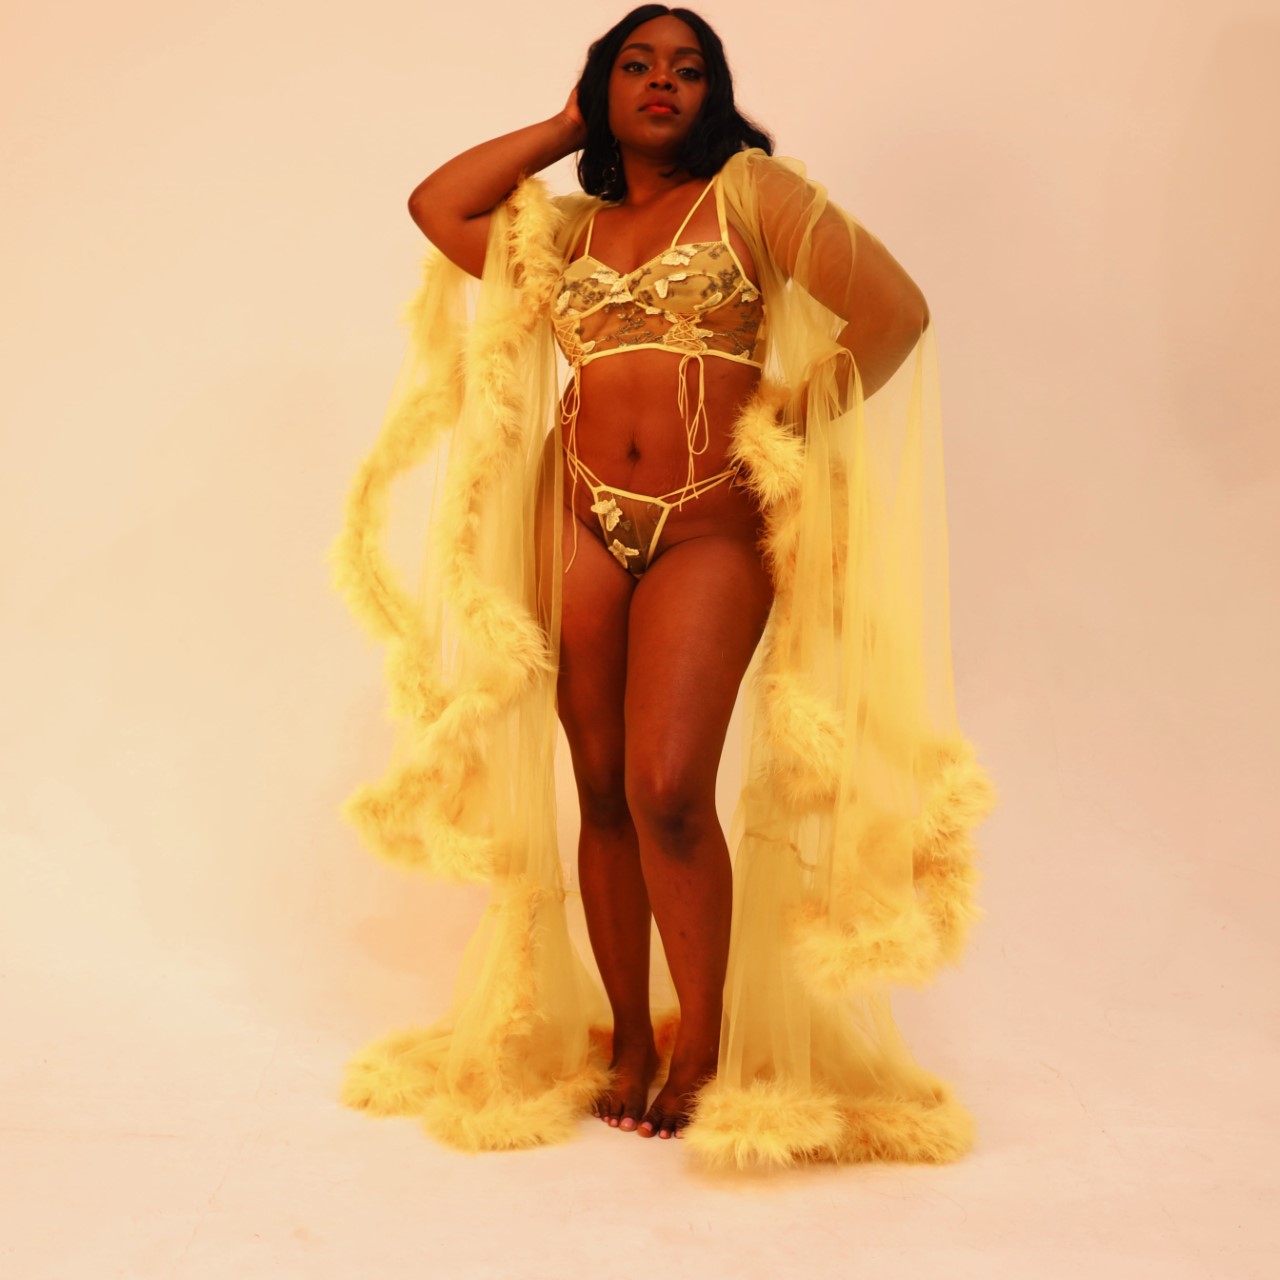 Mistress Marley’s Lingerie Line Pynk Matrixx Officially Drops Today